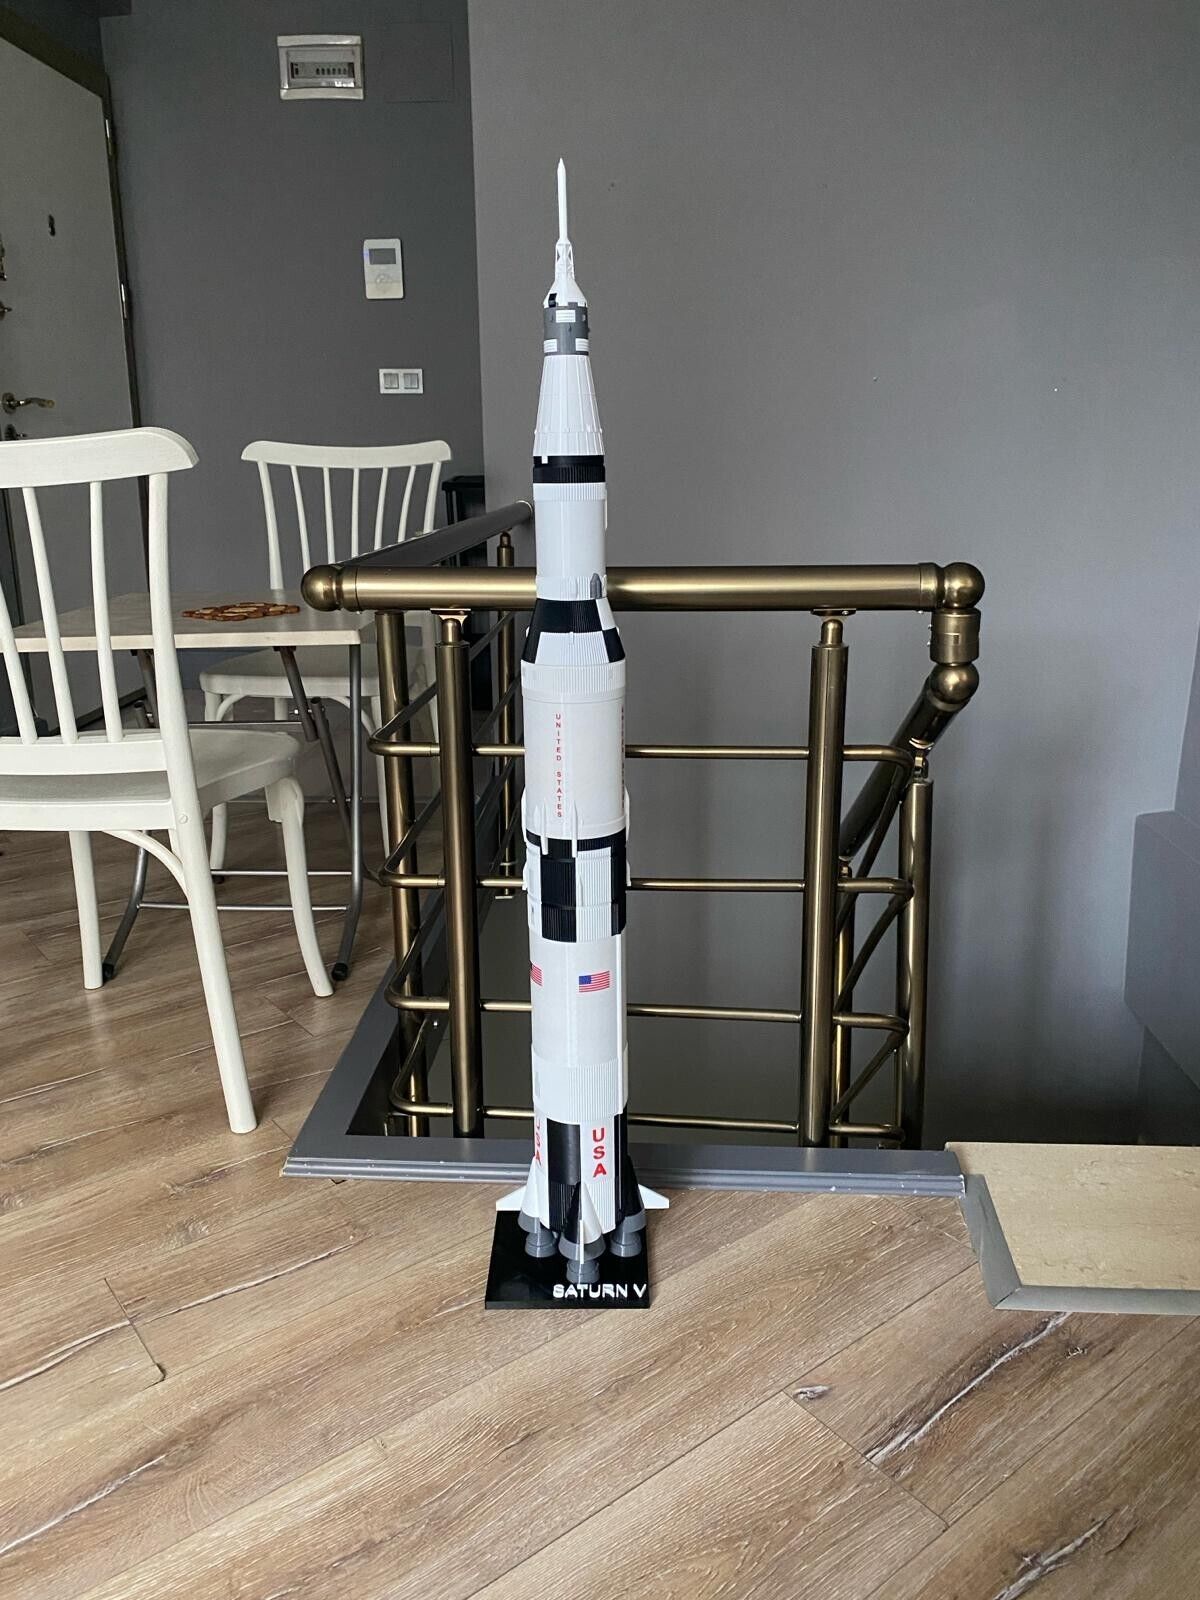 1/100 Scale Saturn V 3D Rocket Model - 111 cm (43.70 inches)